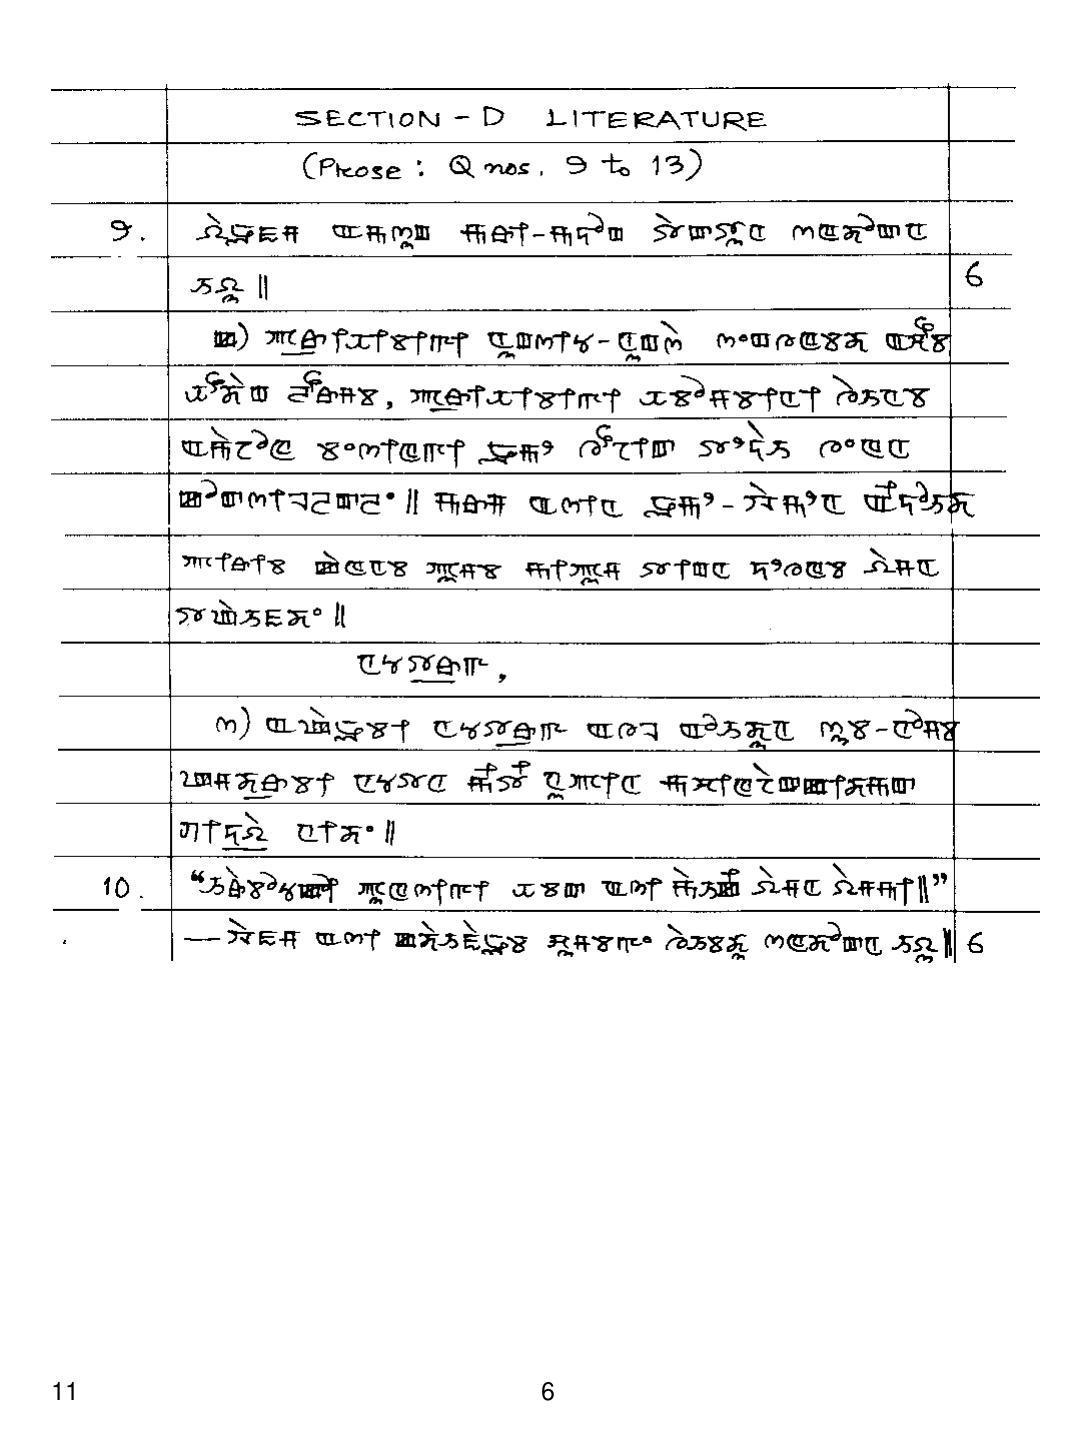 CBSE Class 12 11 Manipuri_compressed 2019 Question Paper - Page 6